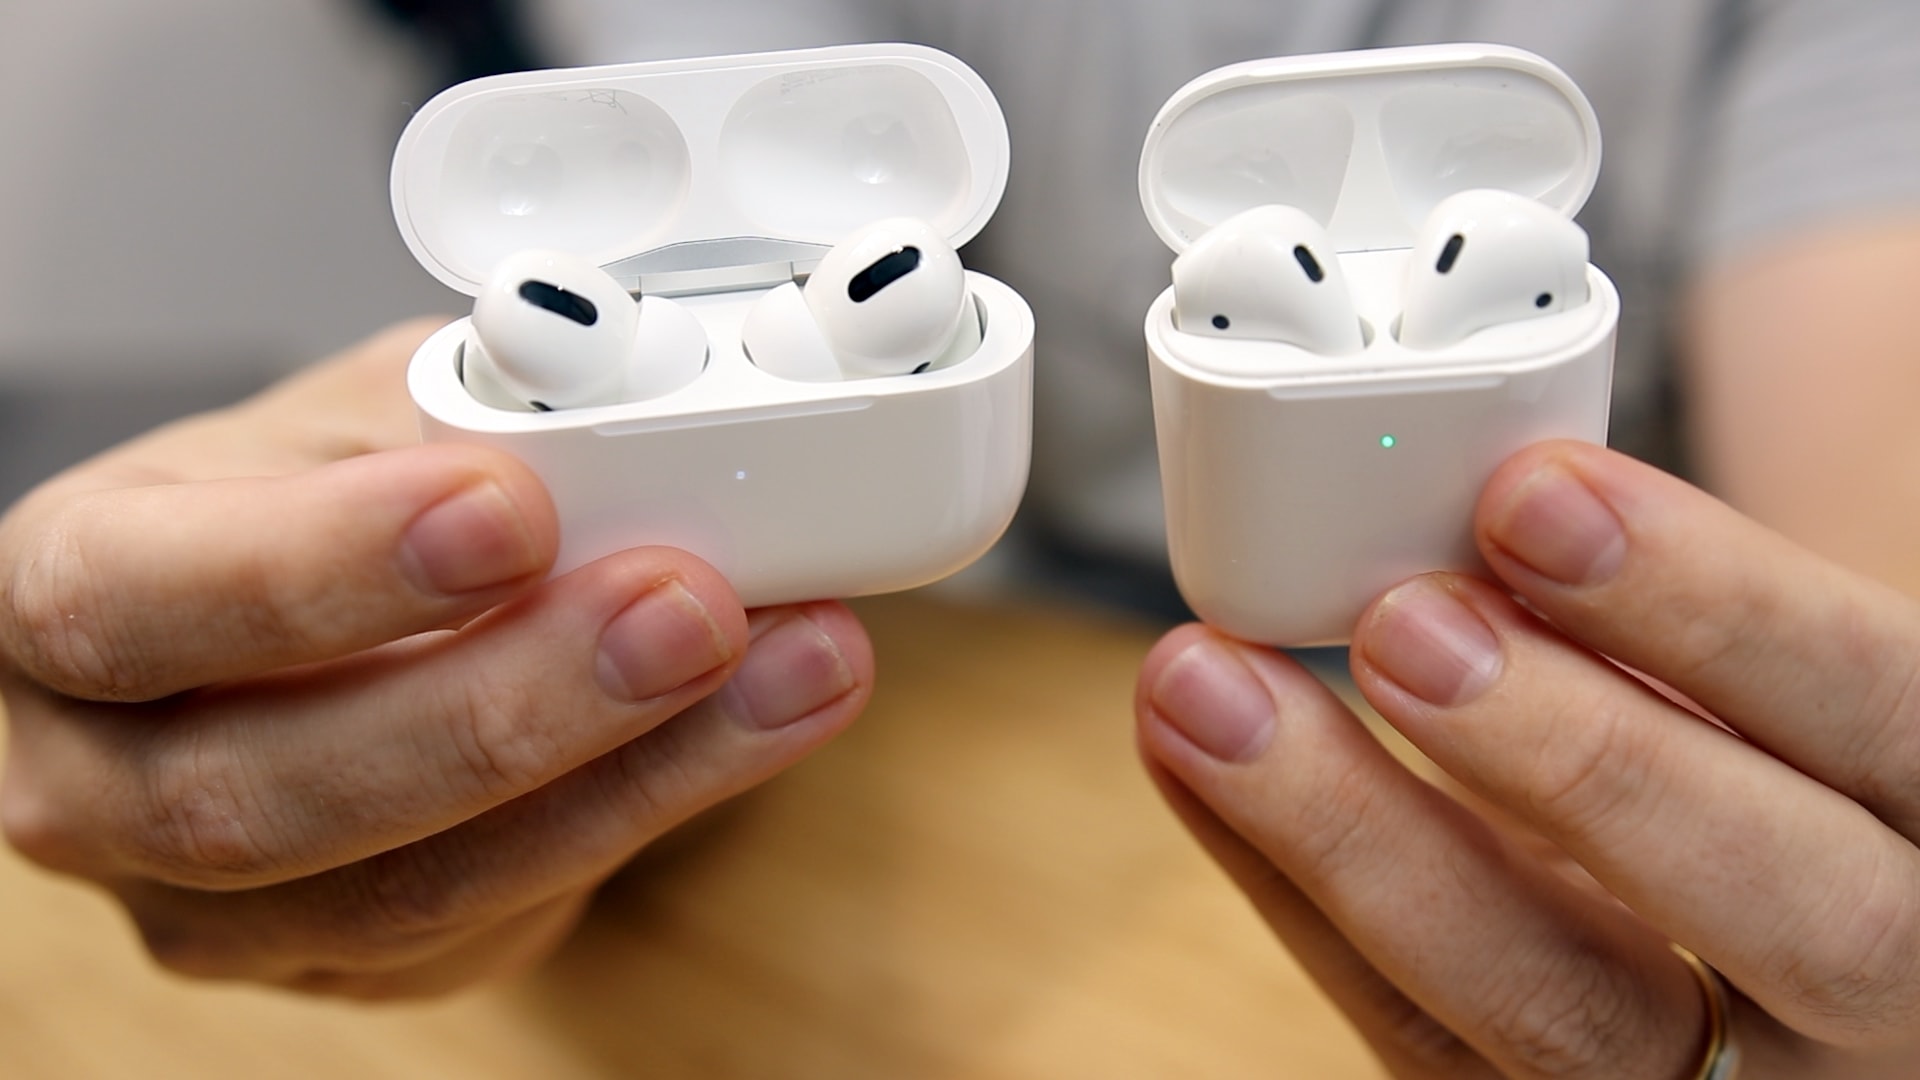 Video: unboxing, hands-on… all about AirPods Pro!